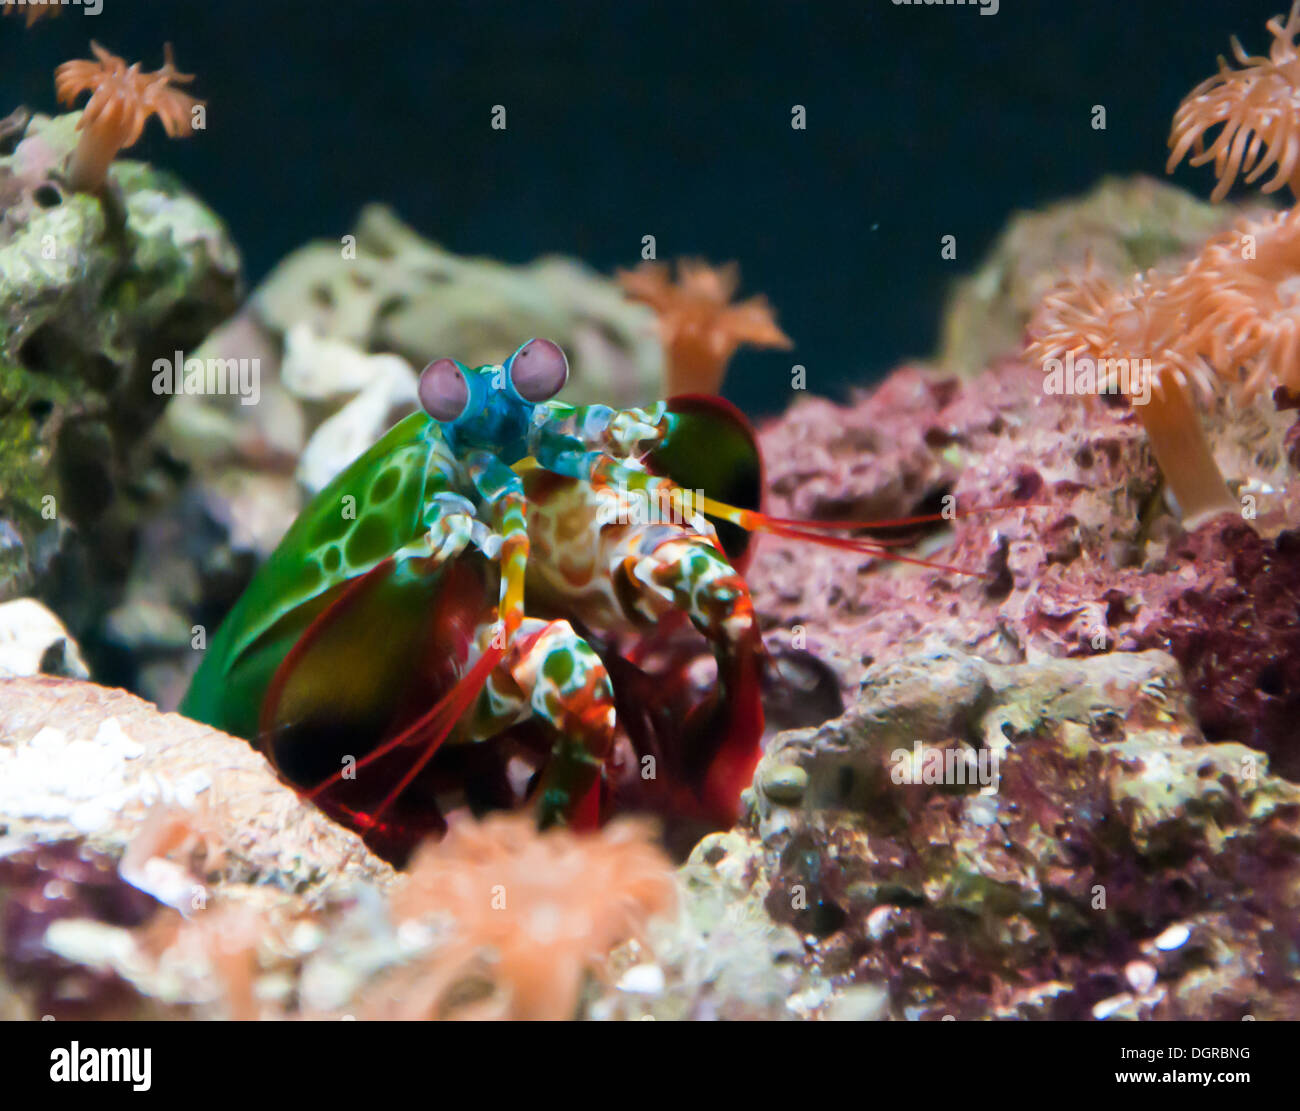 colorful mantis shrimp watching from burrow in coral reef Stock Photo